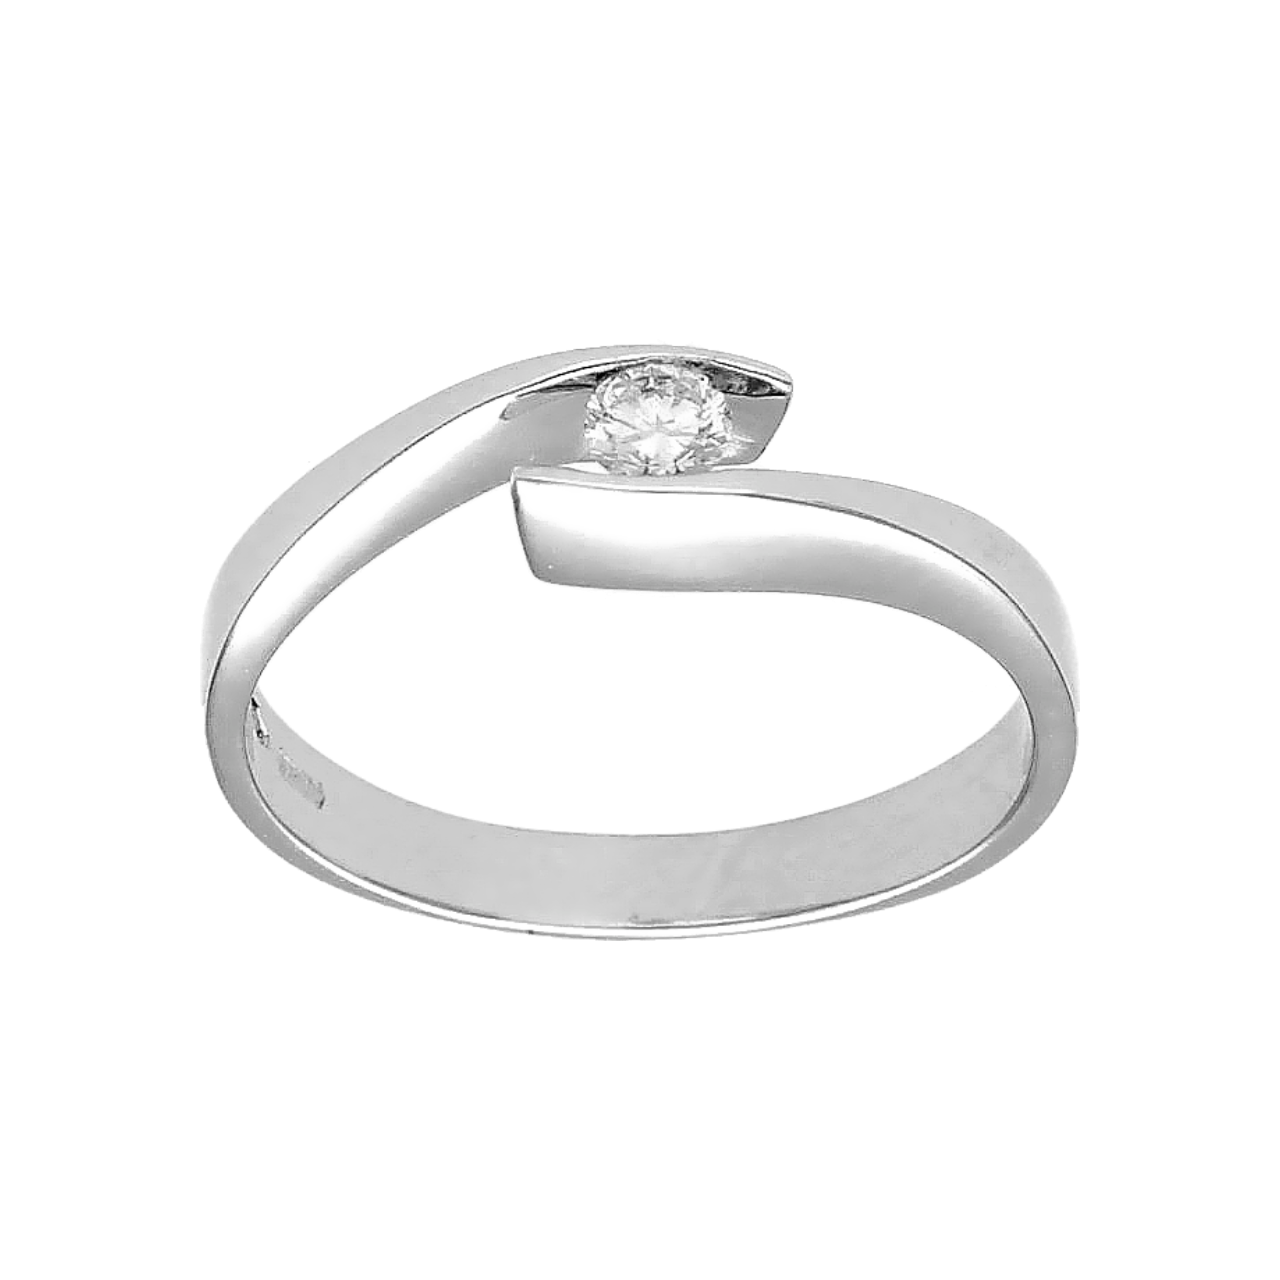 Contrariè white gold ring with 0.14 ct. diamond